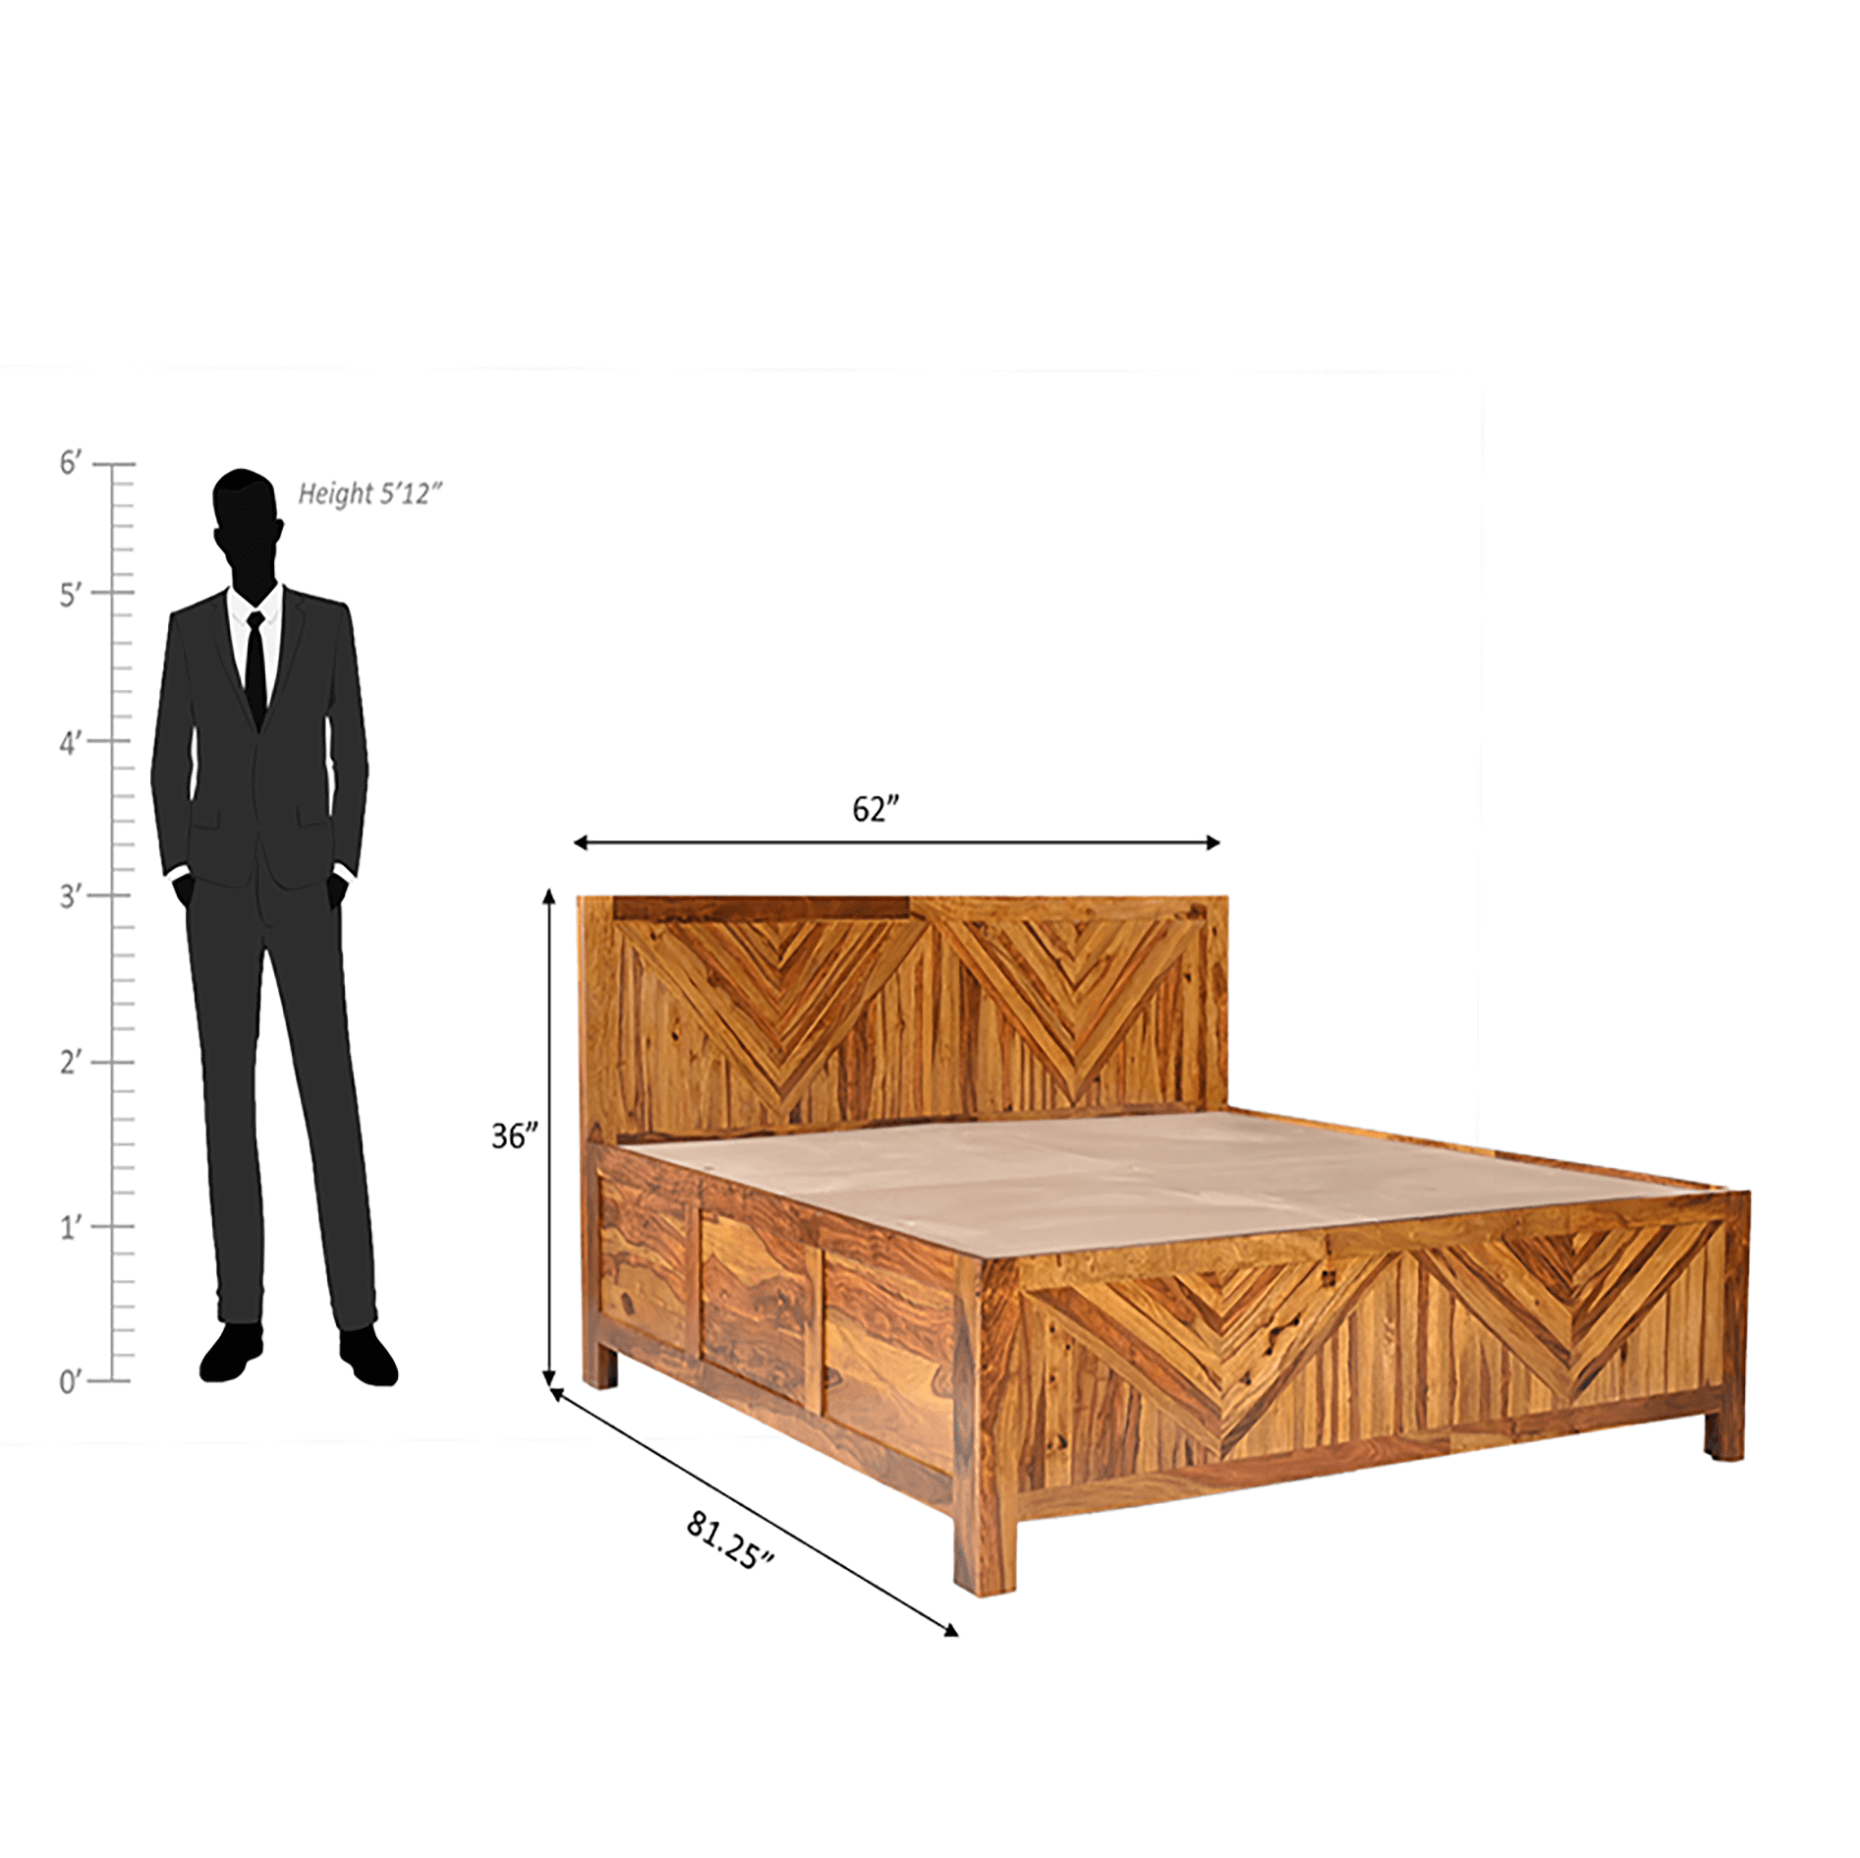 Alpha Sheesham Wood Bed In Light Honey With Box Storage